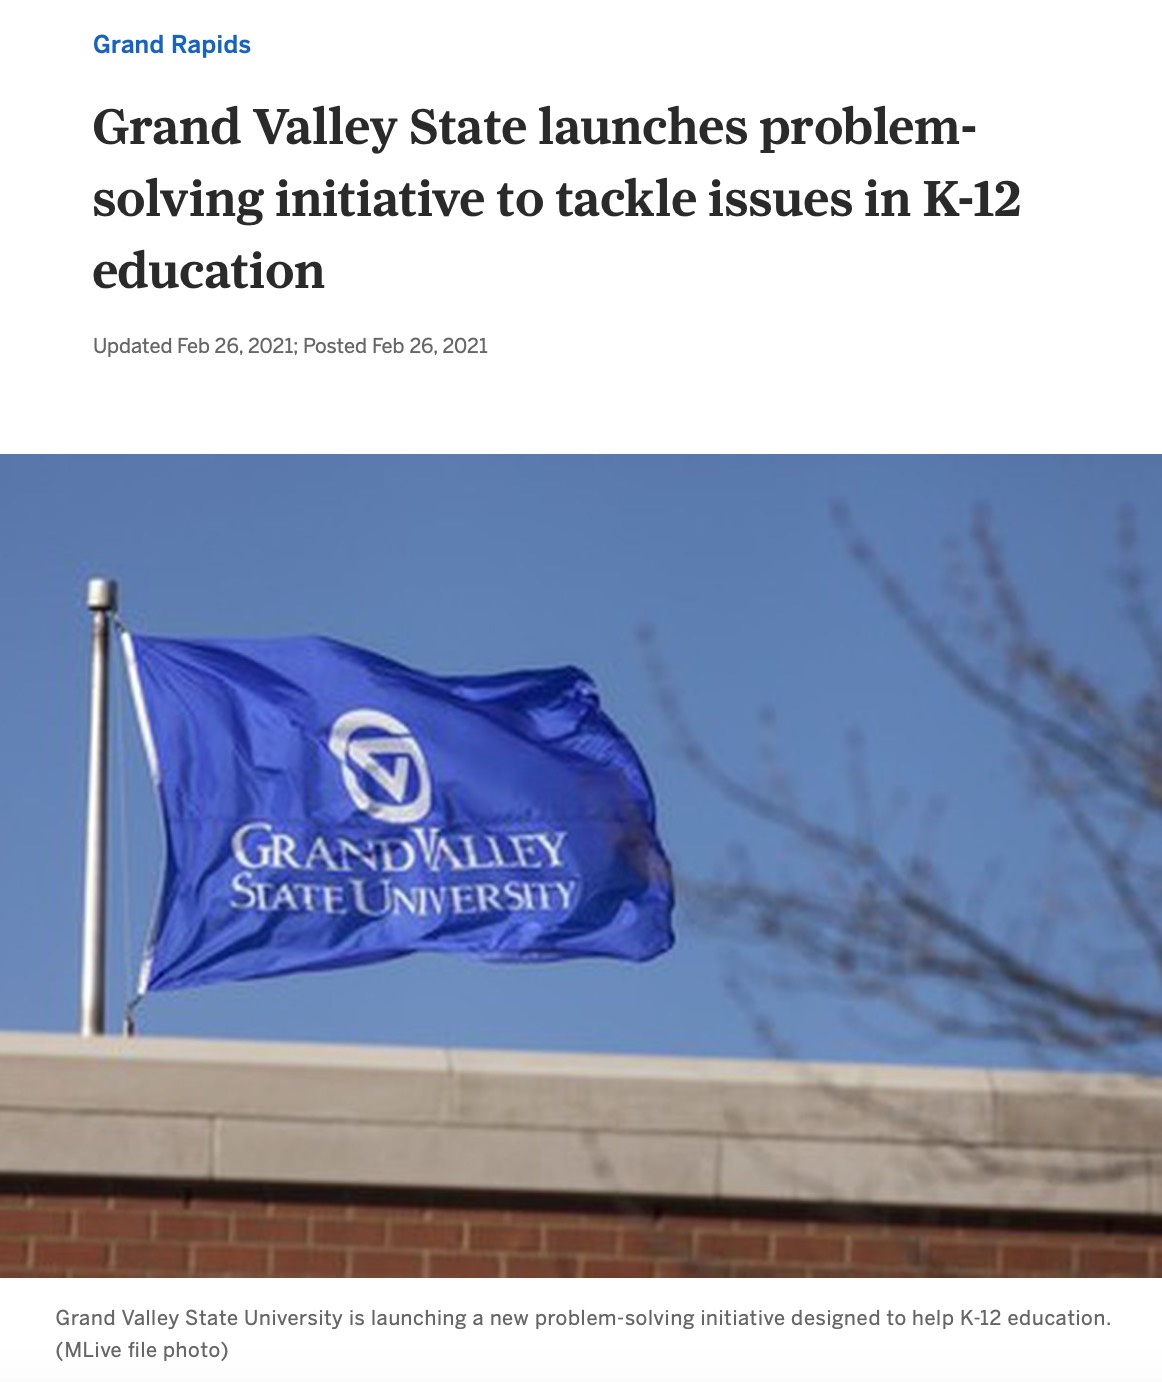 Screenshot of article "Grand Valley State launches problem-solving initiative to tackle issues in K-12 education" with photo of GVSU flag